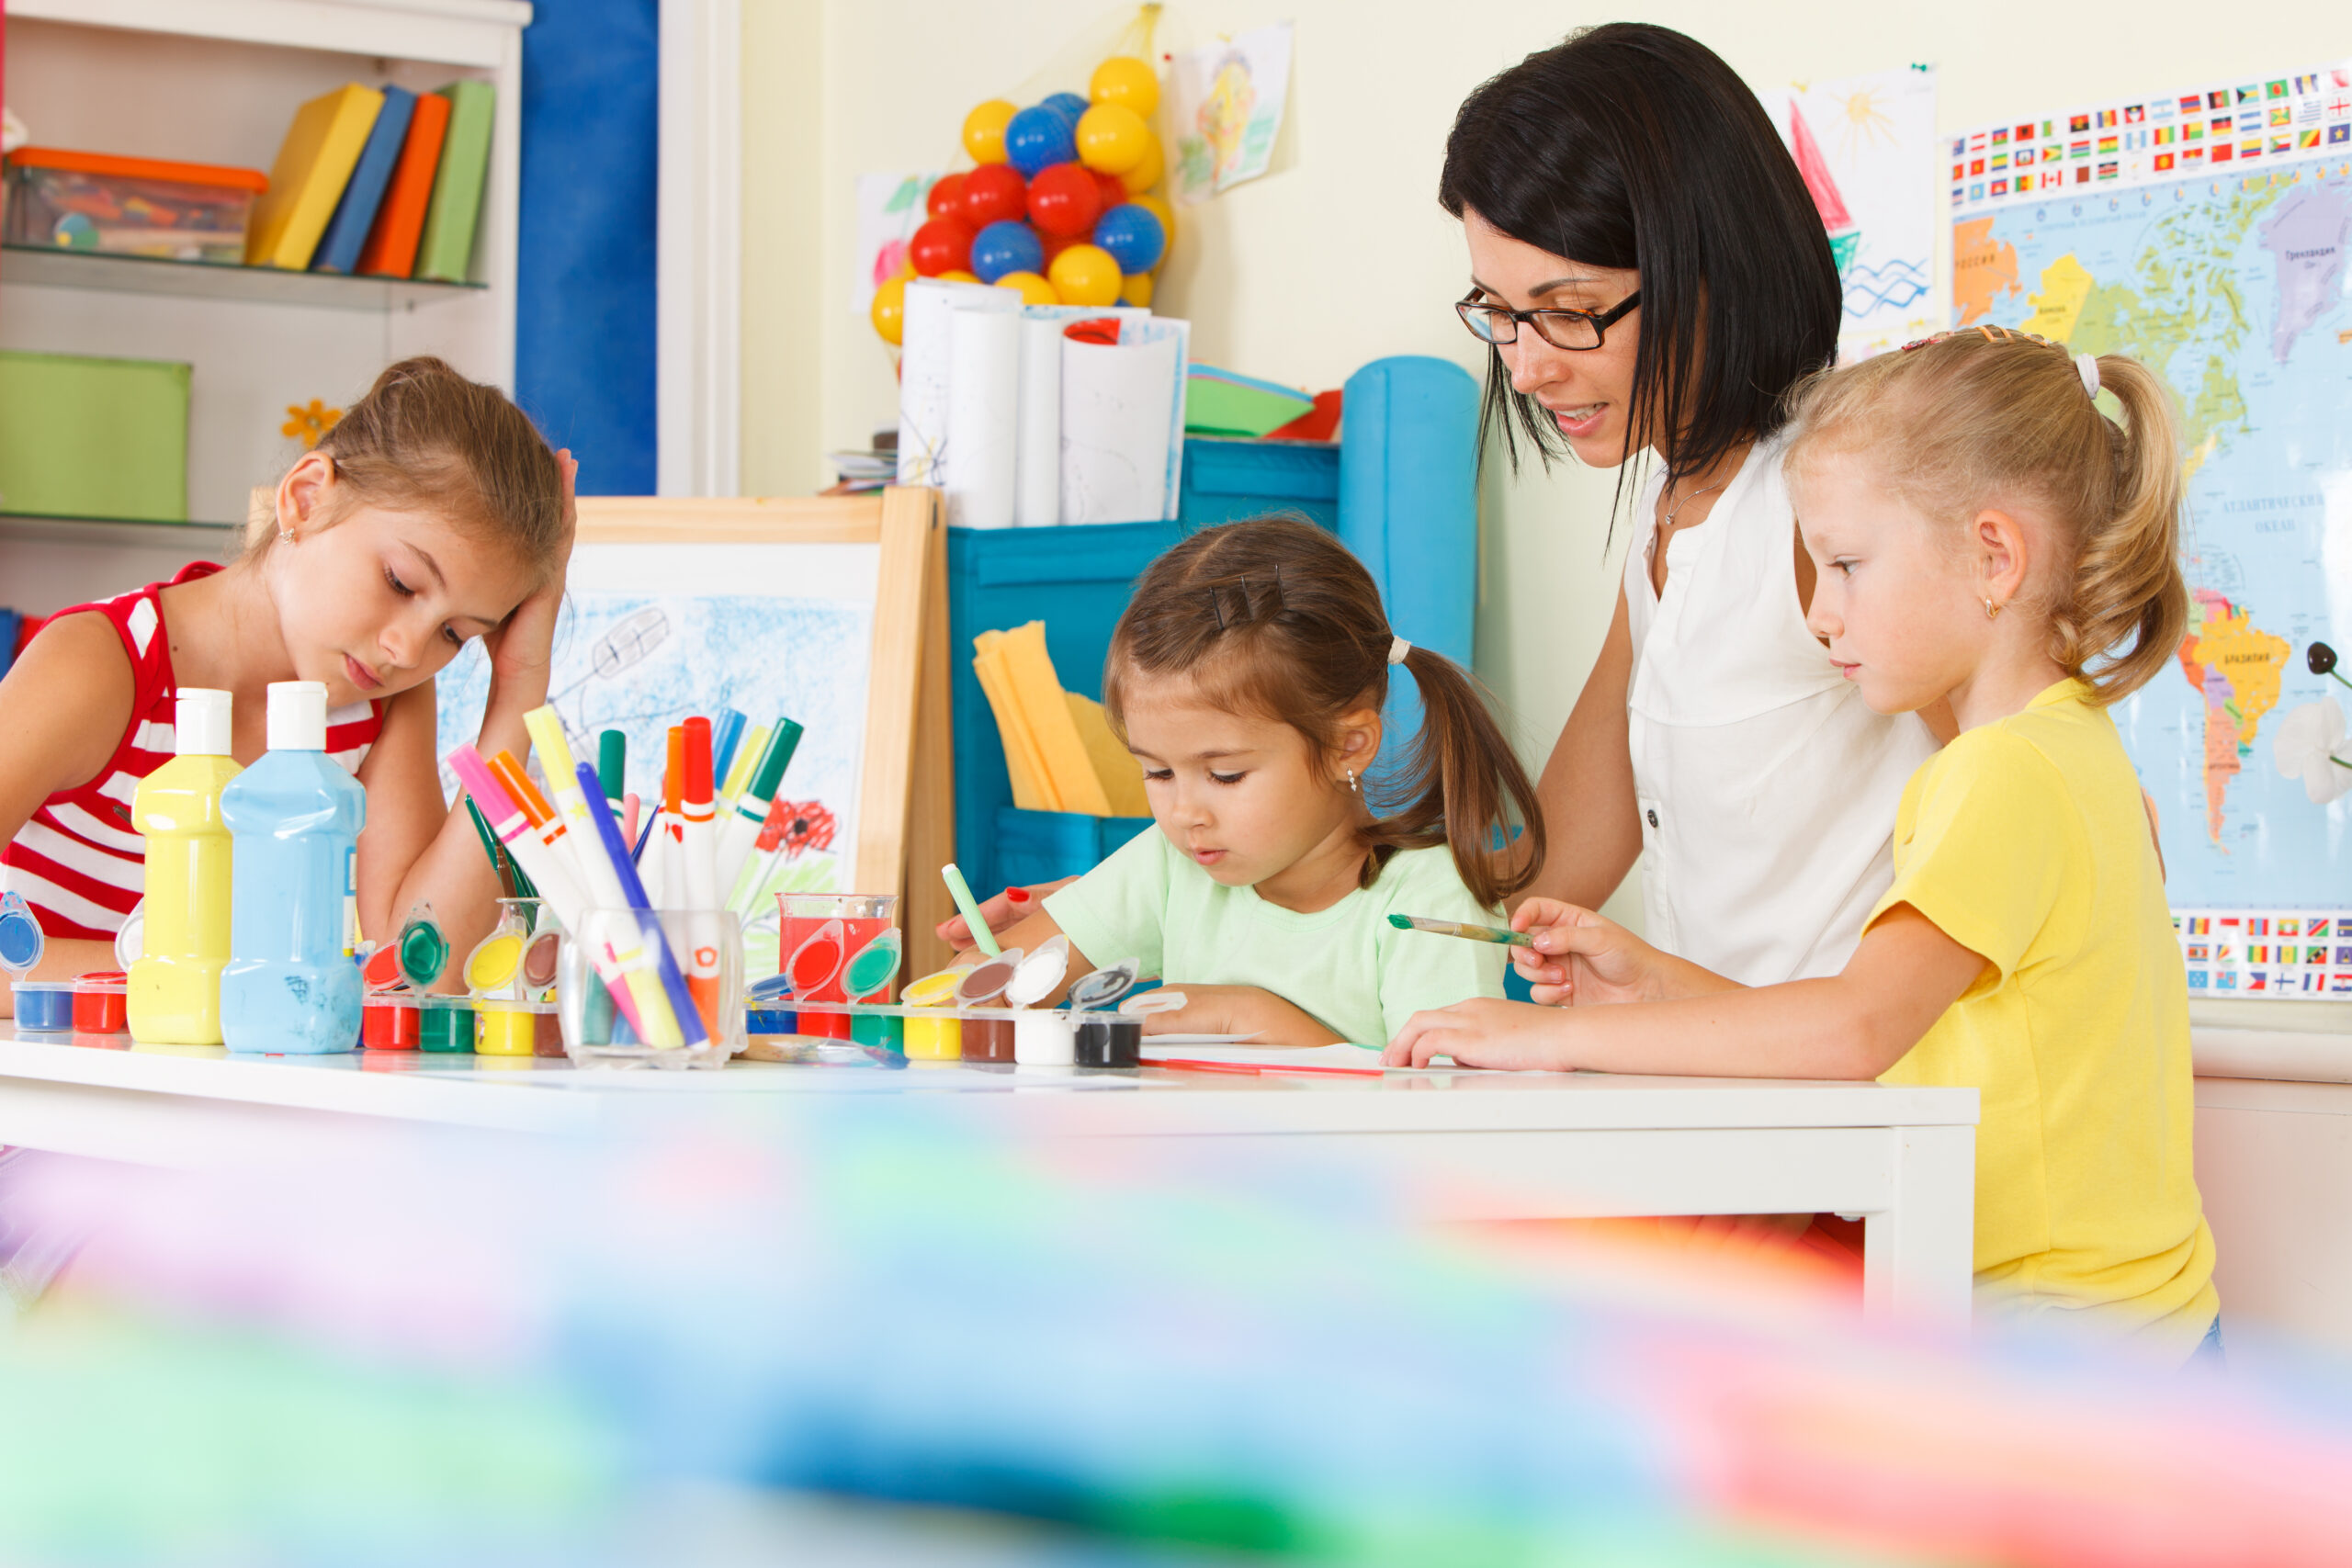 Offer Quality Care as a Childcare Provider